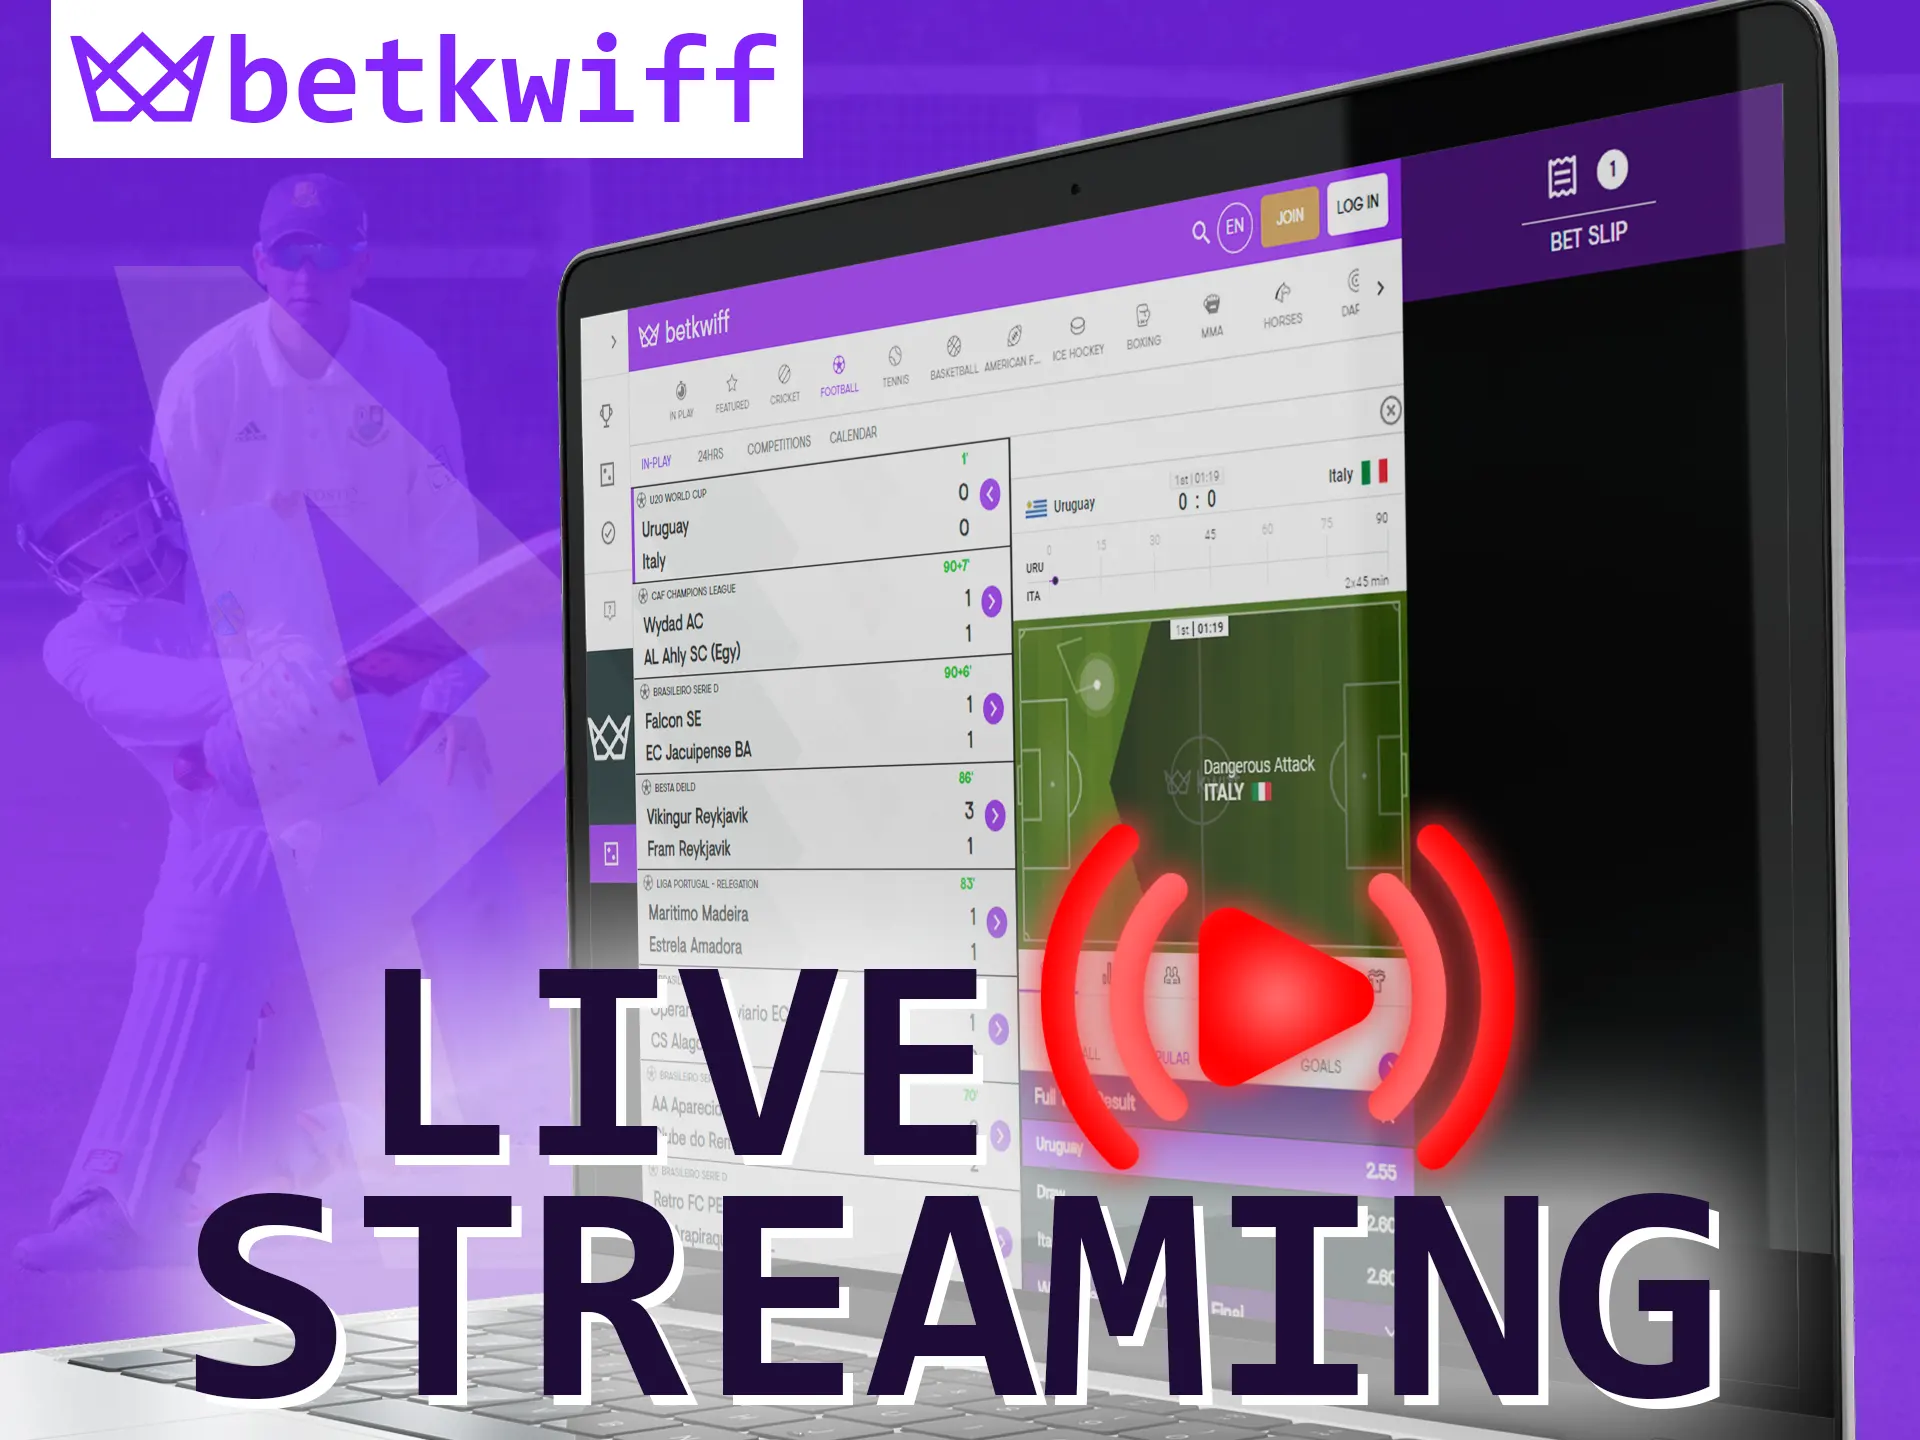 With Betkwiff, follow the game in live streaming.